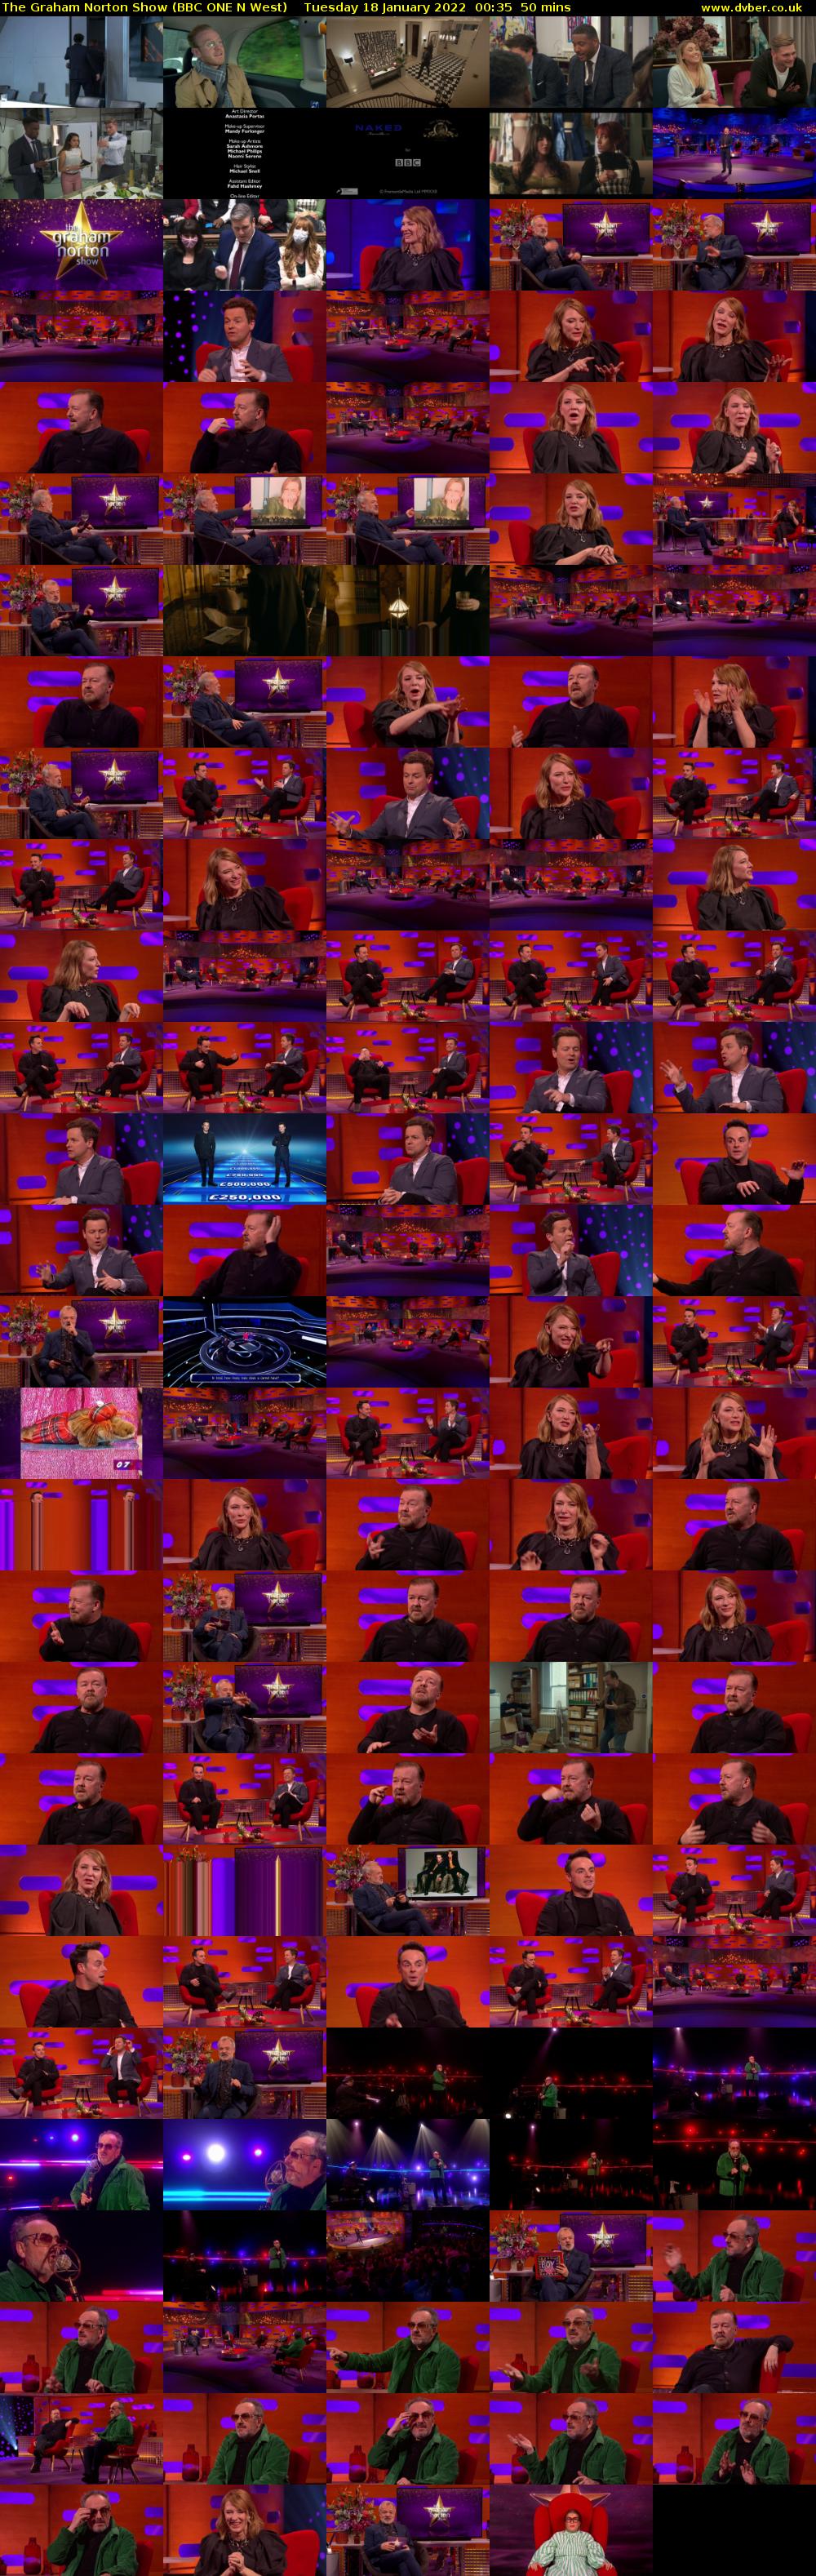 The Graham Norton Show (BBC ONE N West) Tuesday 18 January 2022 00:35 - 01:25